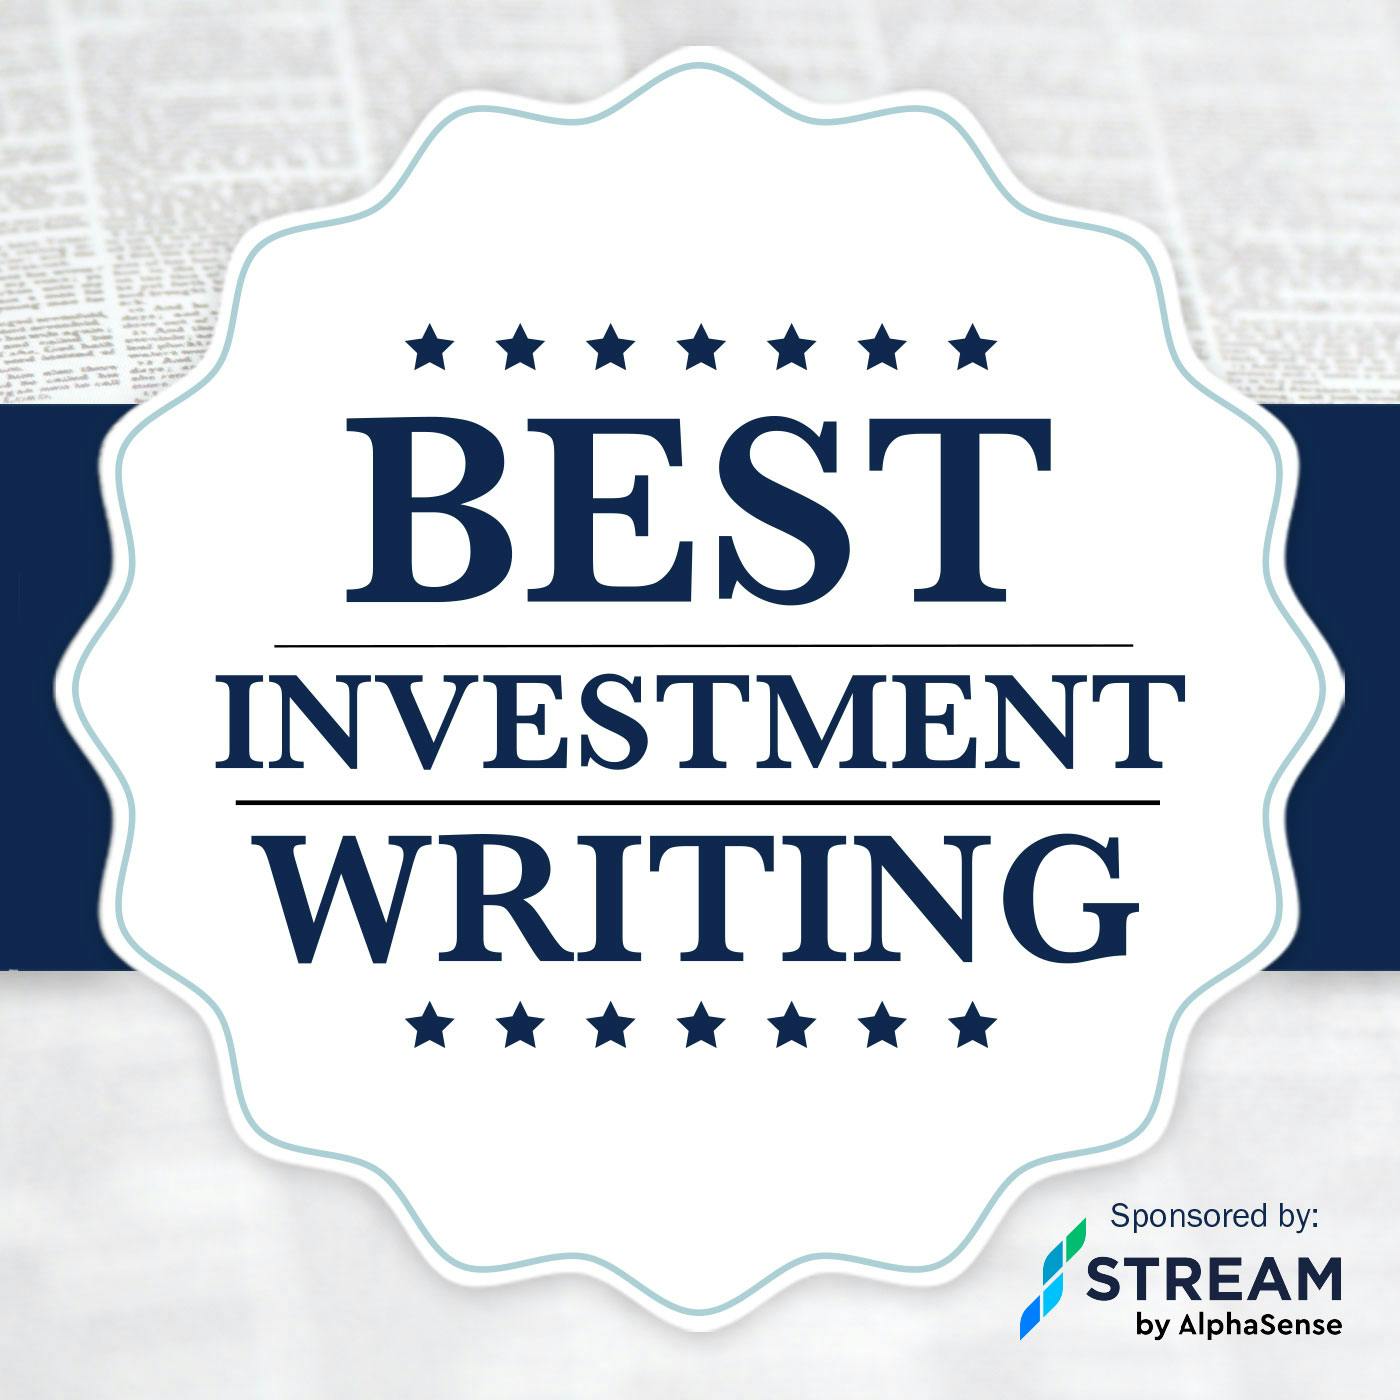 Ehren Stanhope, O’Shaughnessy Asset Management – The Great Inflation, Factors, and Stock Returns (The Best Investment Writing Volume 6)